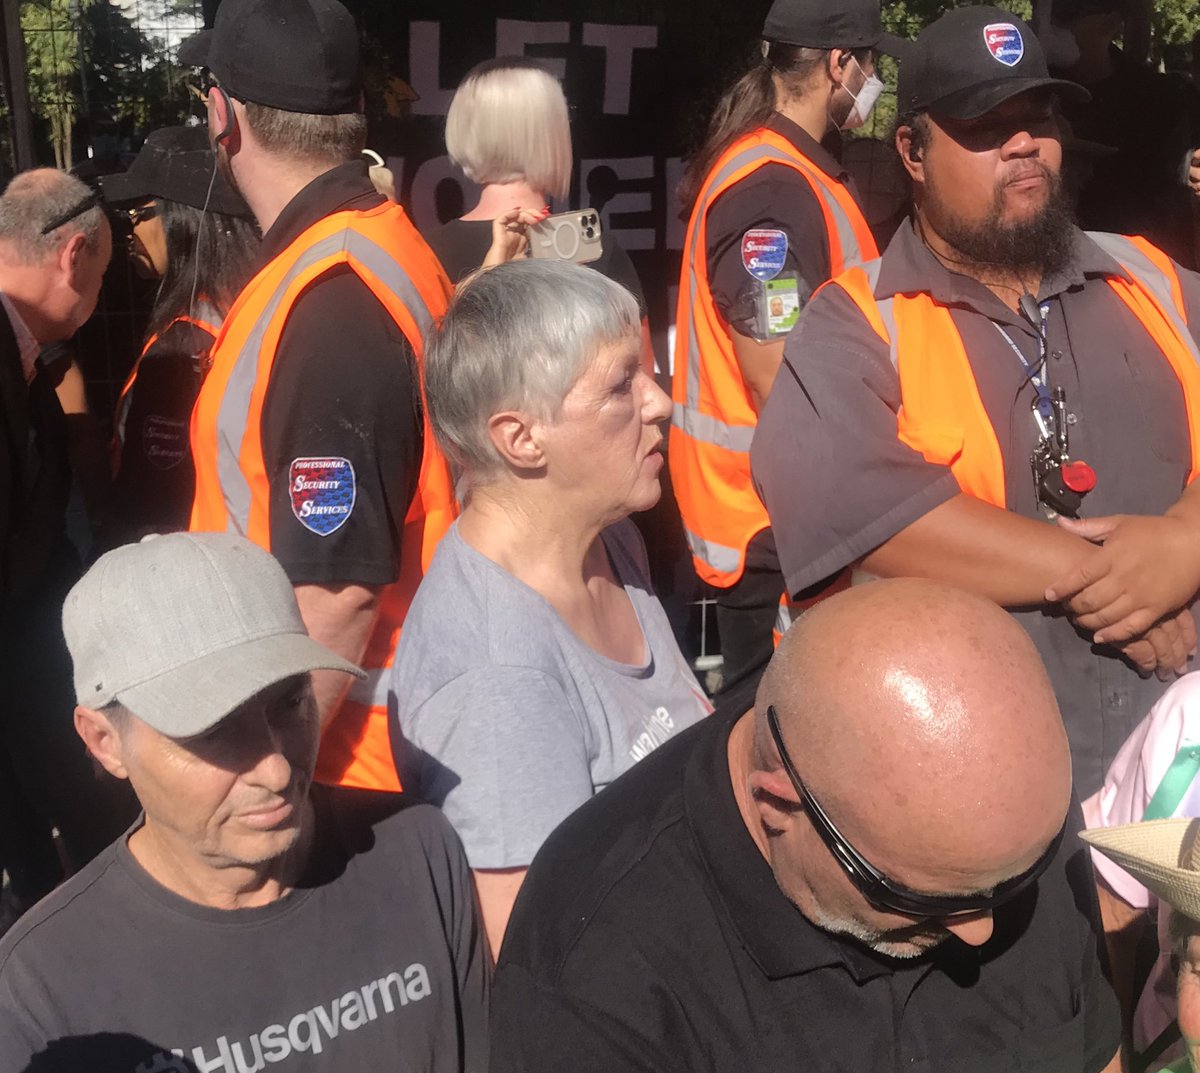 @LeoMolloyNZ @nzherald @nzpolice @shaneellall @AucklandPride And she stayed, sporting a huge black eye to help the stewards and security protect Kellie Jay from the rabid mob. She is a hero ♥️